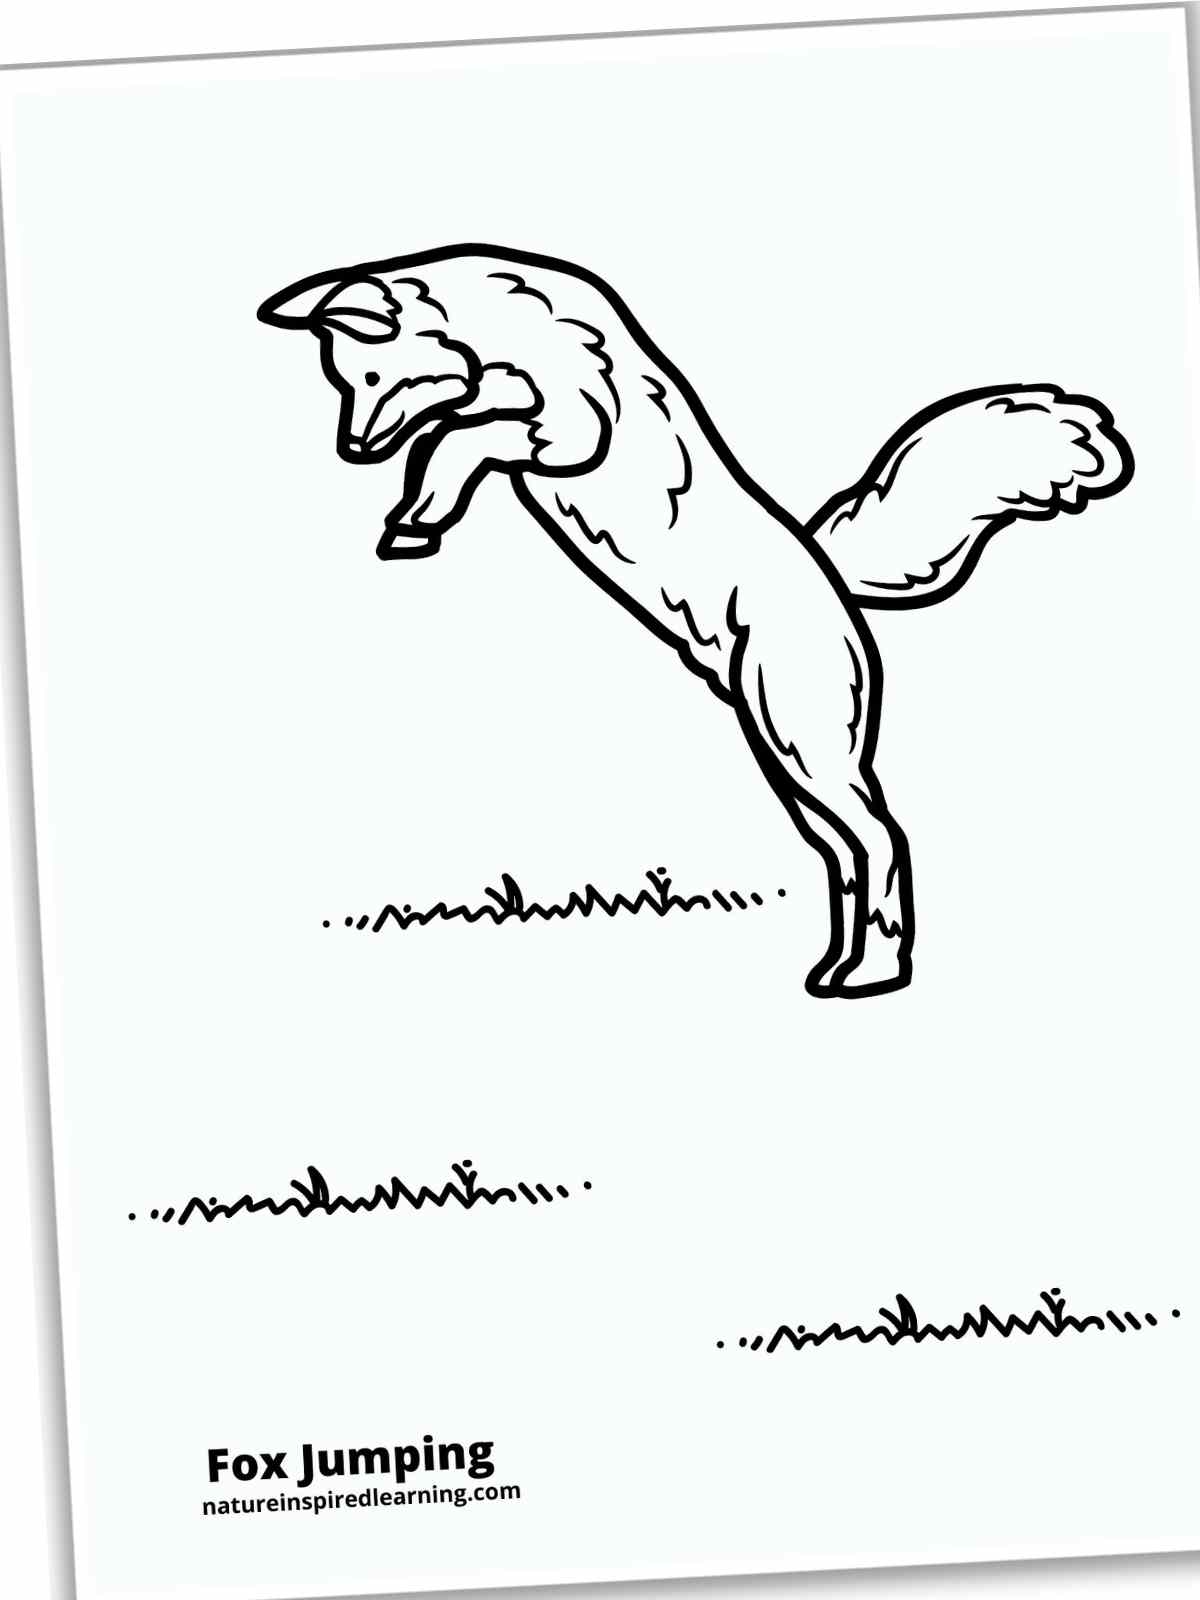 Black and white printable of a Fox jumping above the grass. Slanted on a white background with a drop shadow.